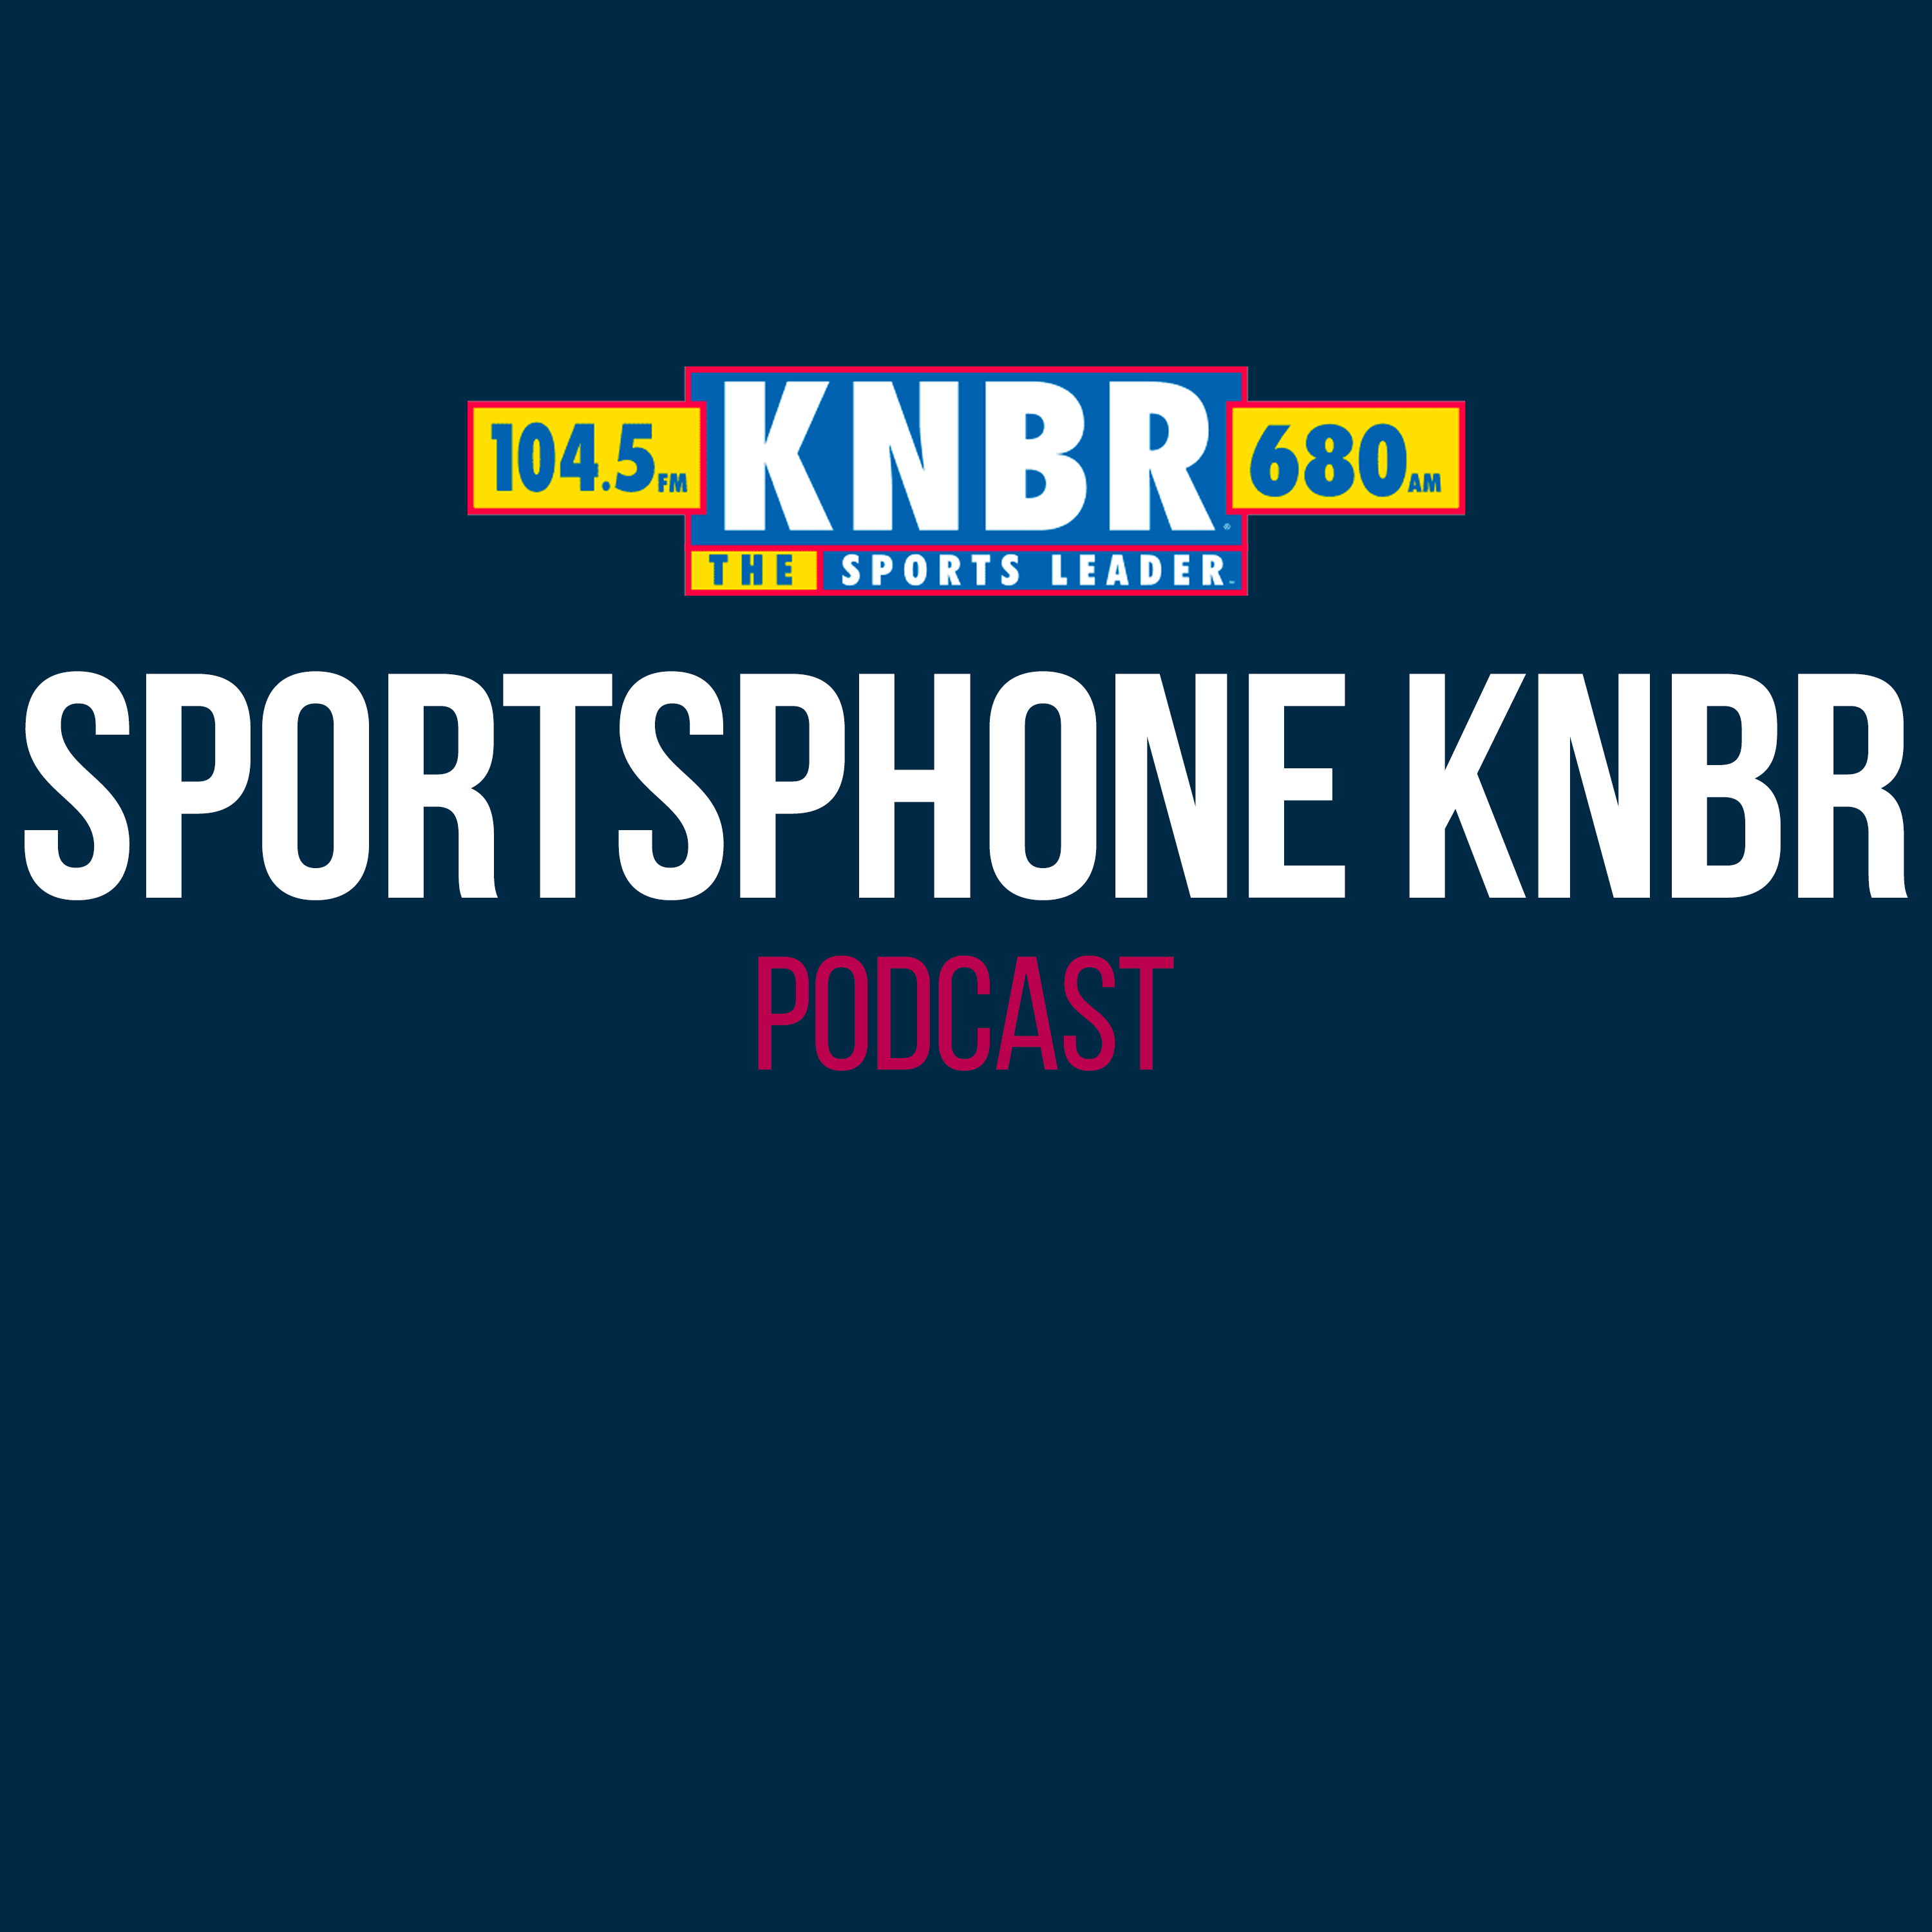 5-6 Danny Emerman joins Dieter on Sportsphone KNBR to talk NBA playoffs and the Warriors' offseason specifically around Klay Thompson